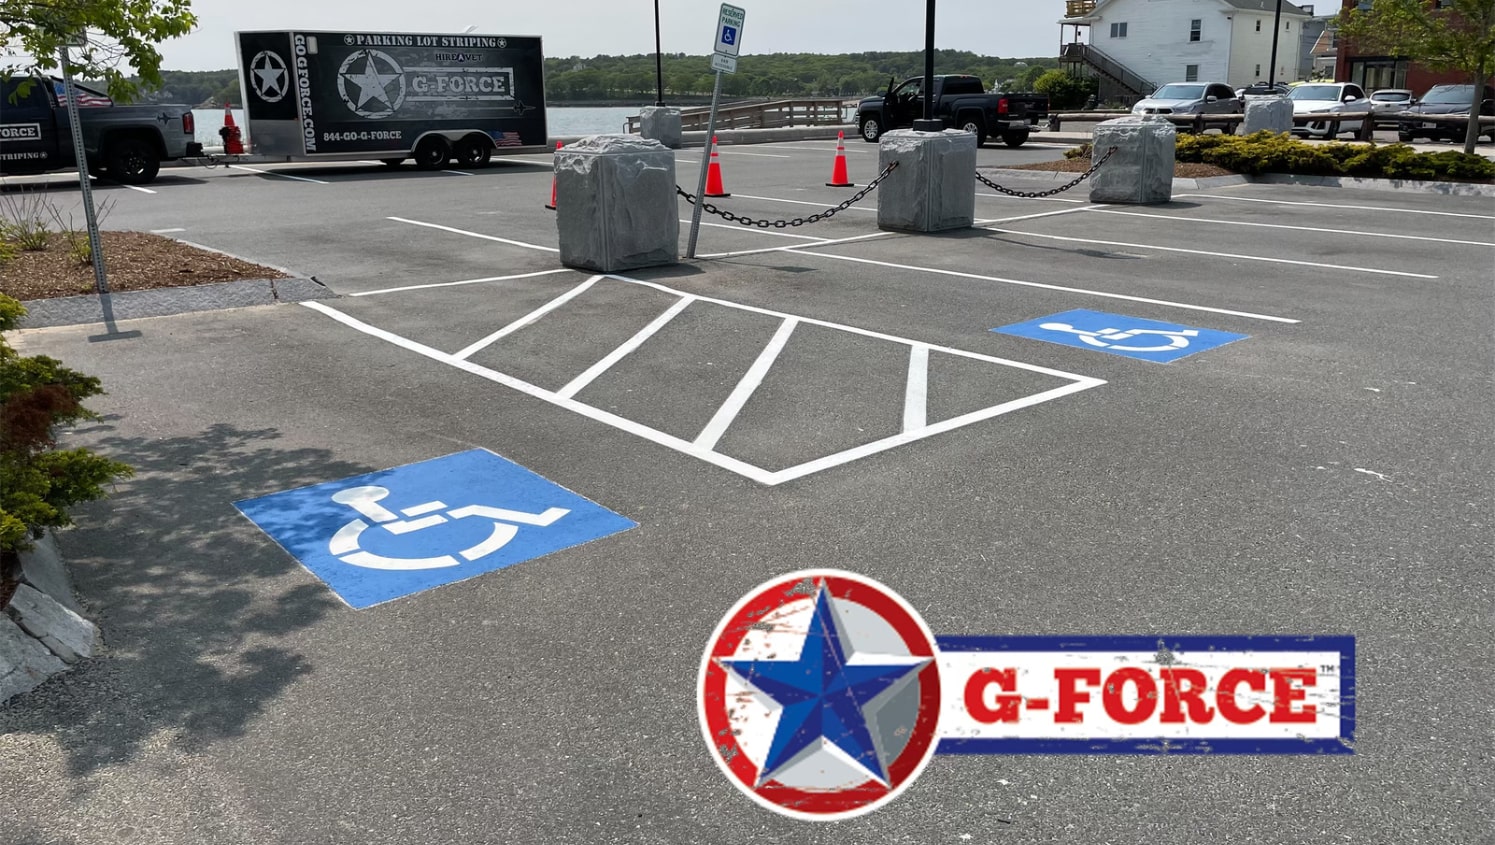 ada-compliant parking lot striping at beauport hotel gloucester